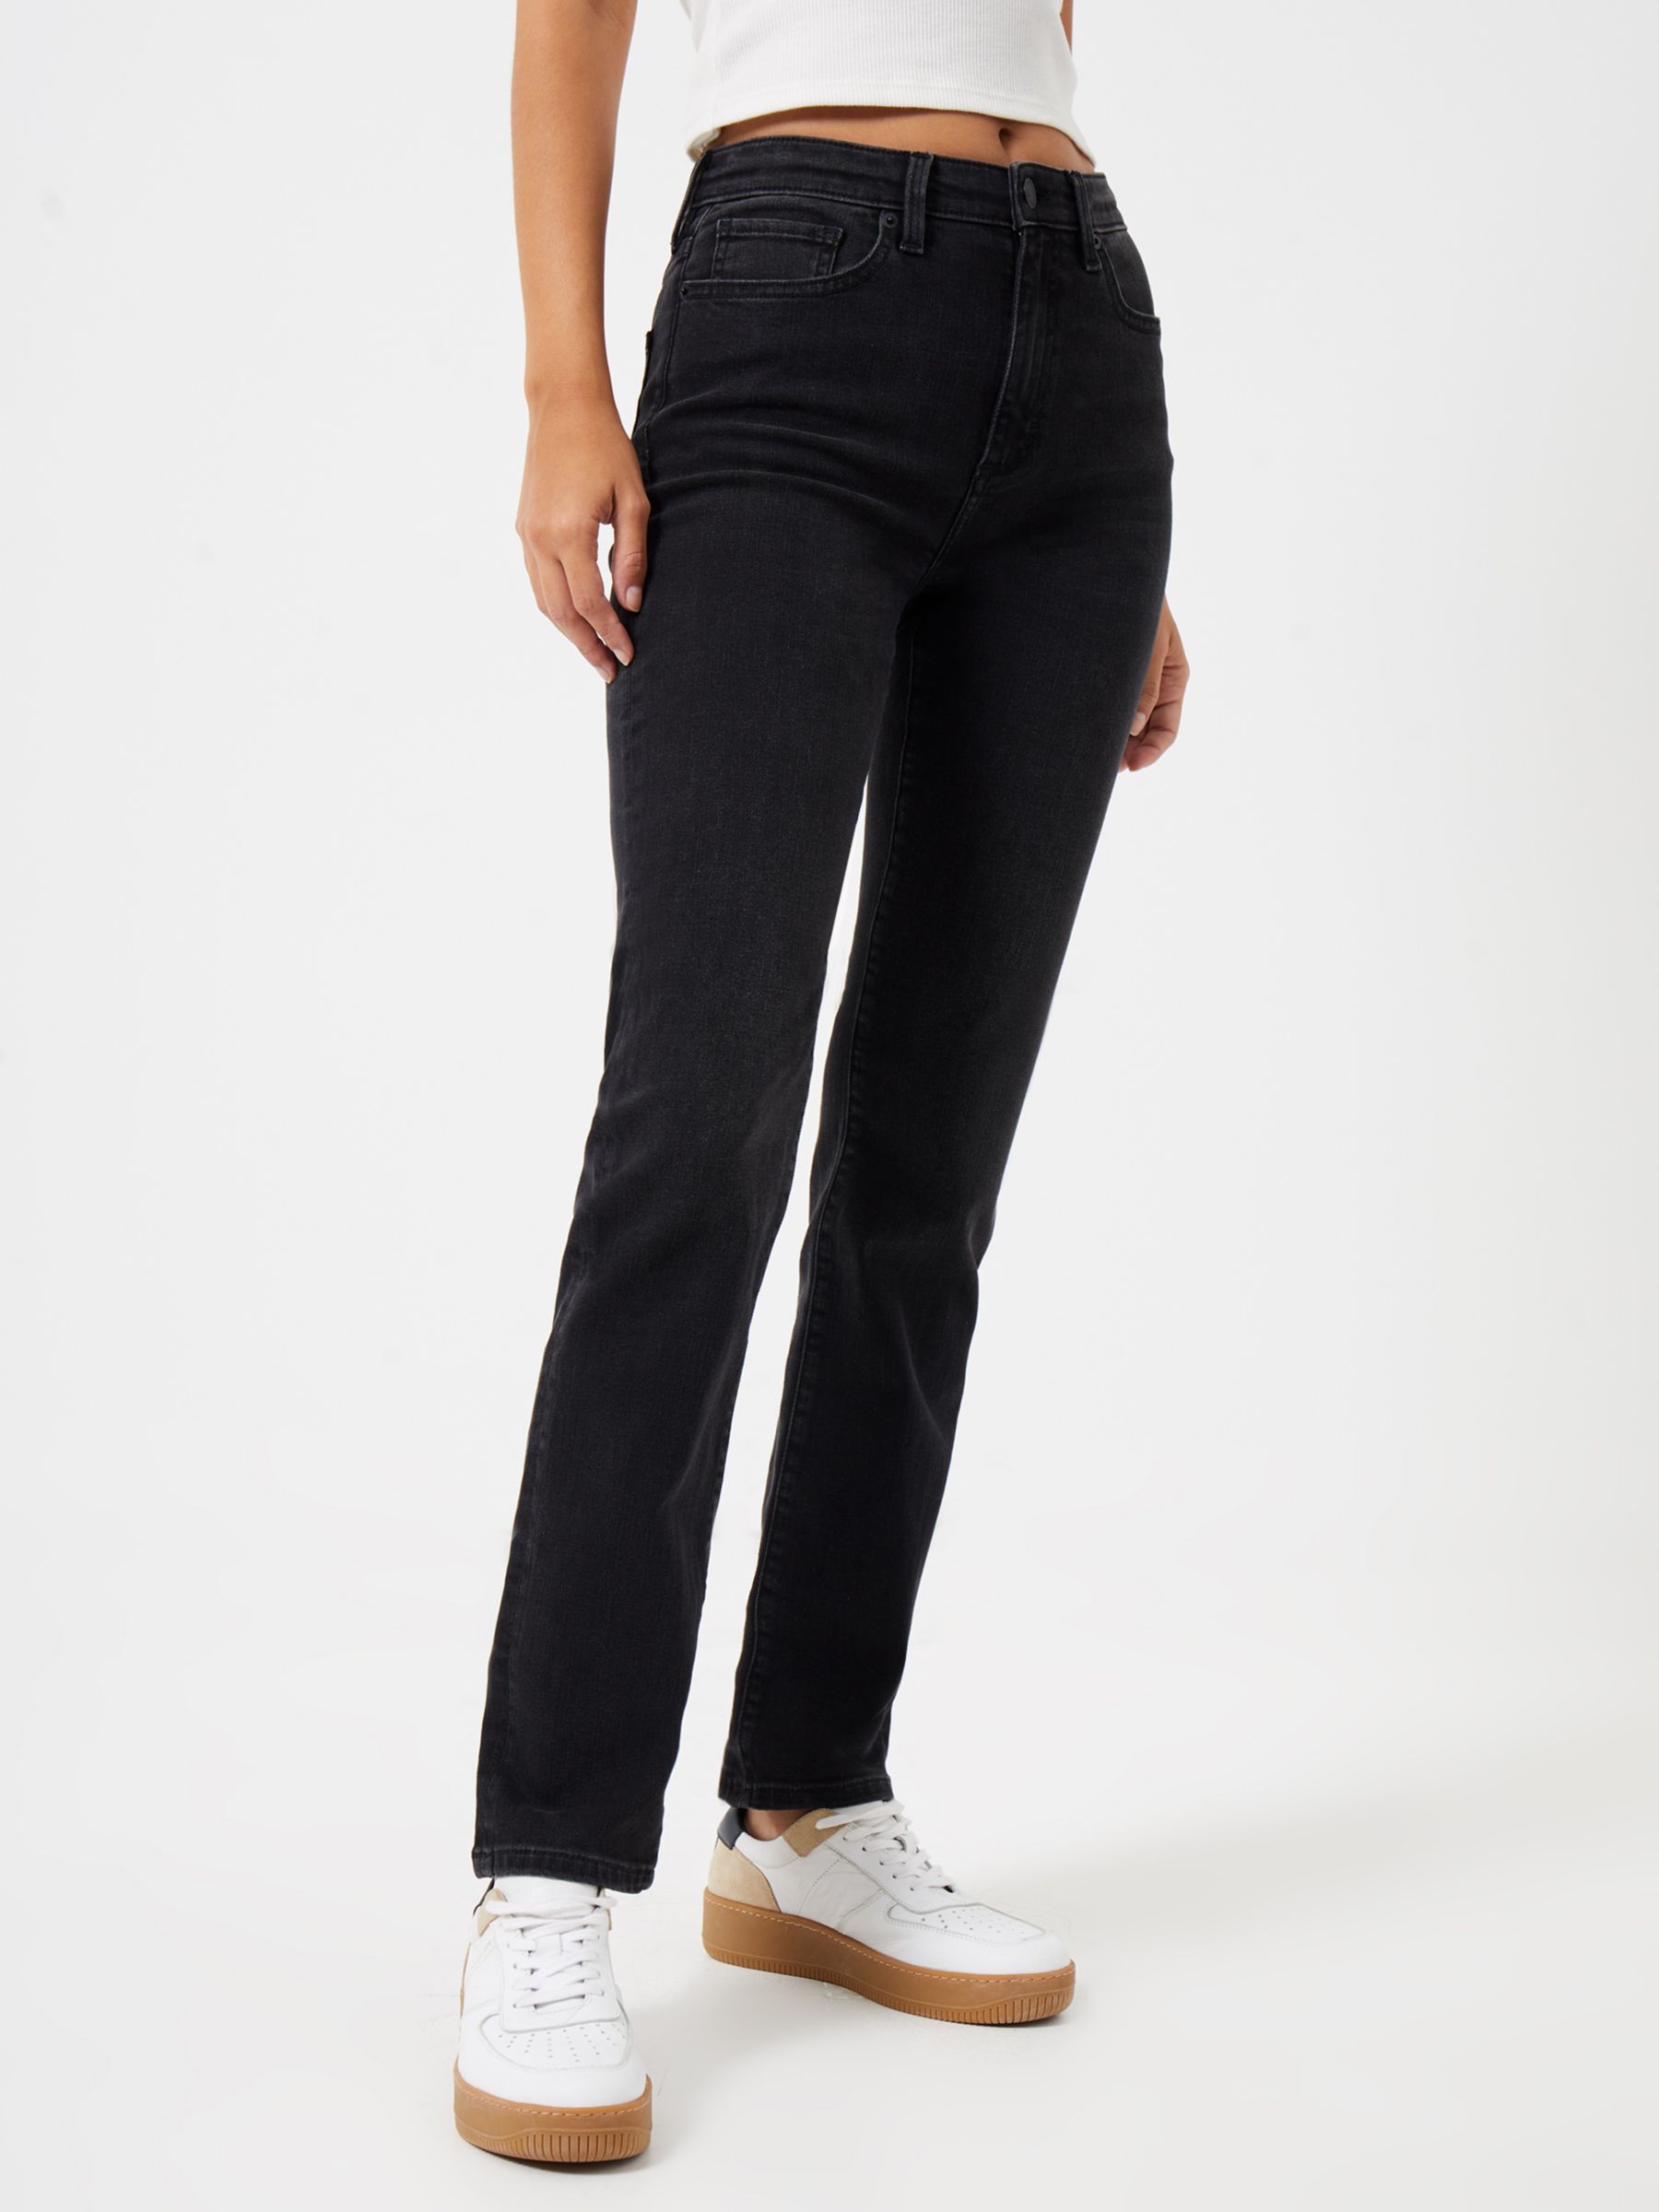 French Connection Stretch Slim Jeans, Black at John Lewis & Partners